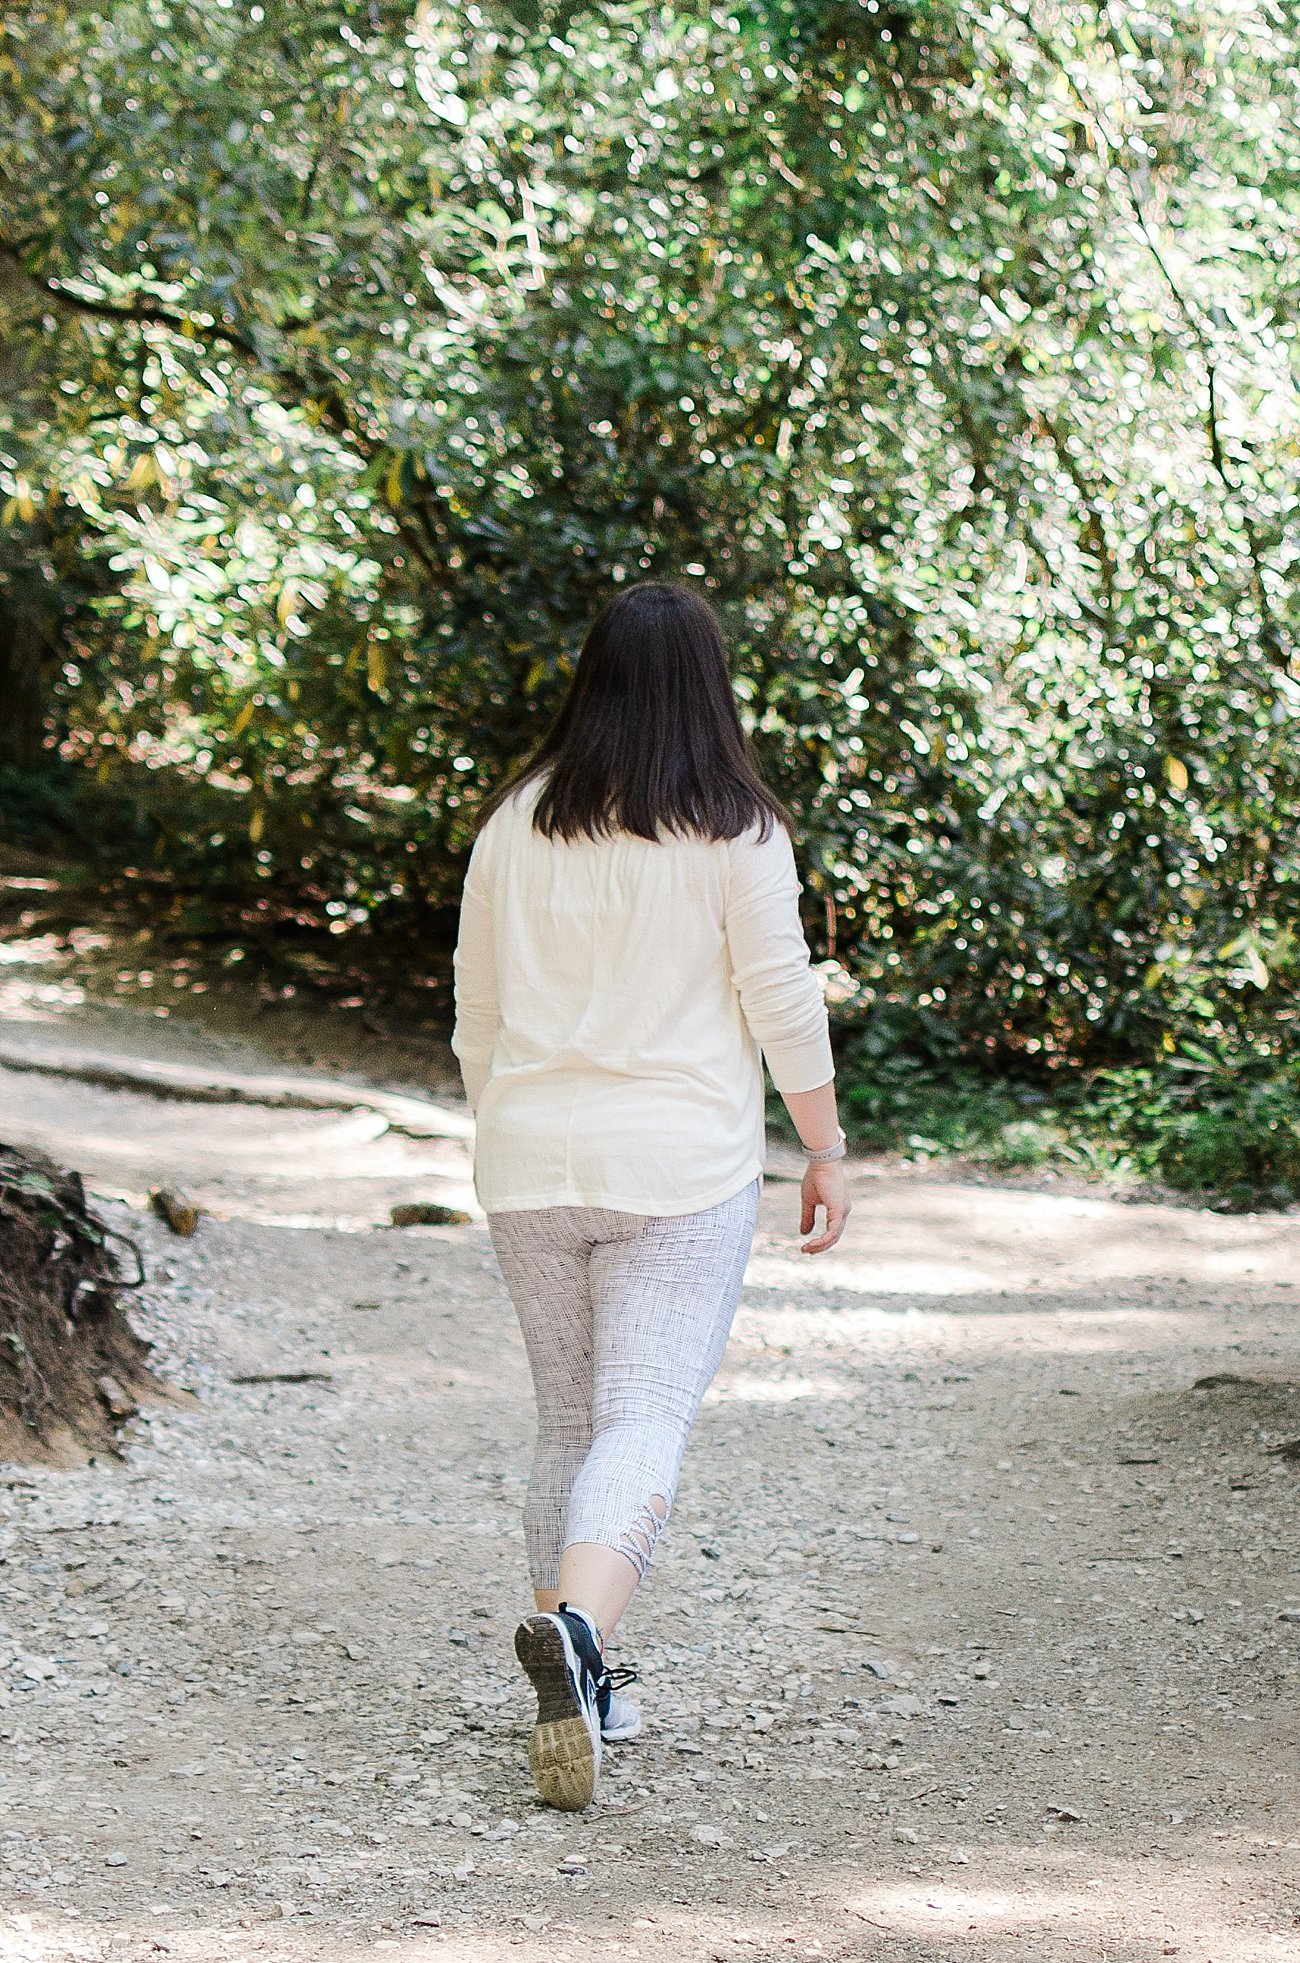 Hike Linville Falls, North Carolina - prAna Ethical and Sustainable Activewear - Ethical Fashion Blogger (2) - A Family Hike at Linville Falls, North Carolina by NC blogger Still Being Molly